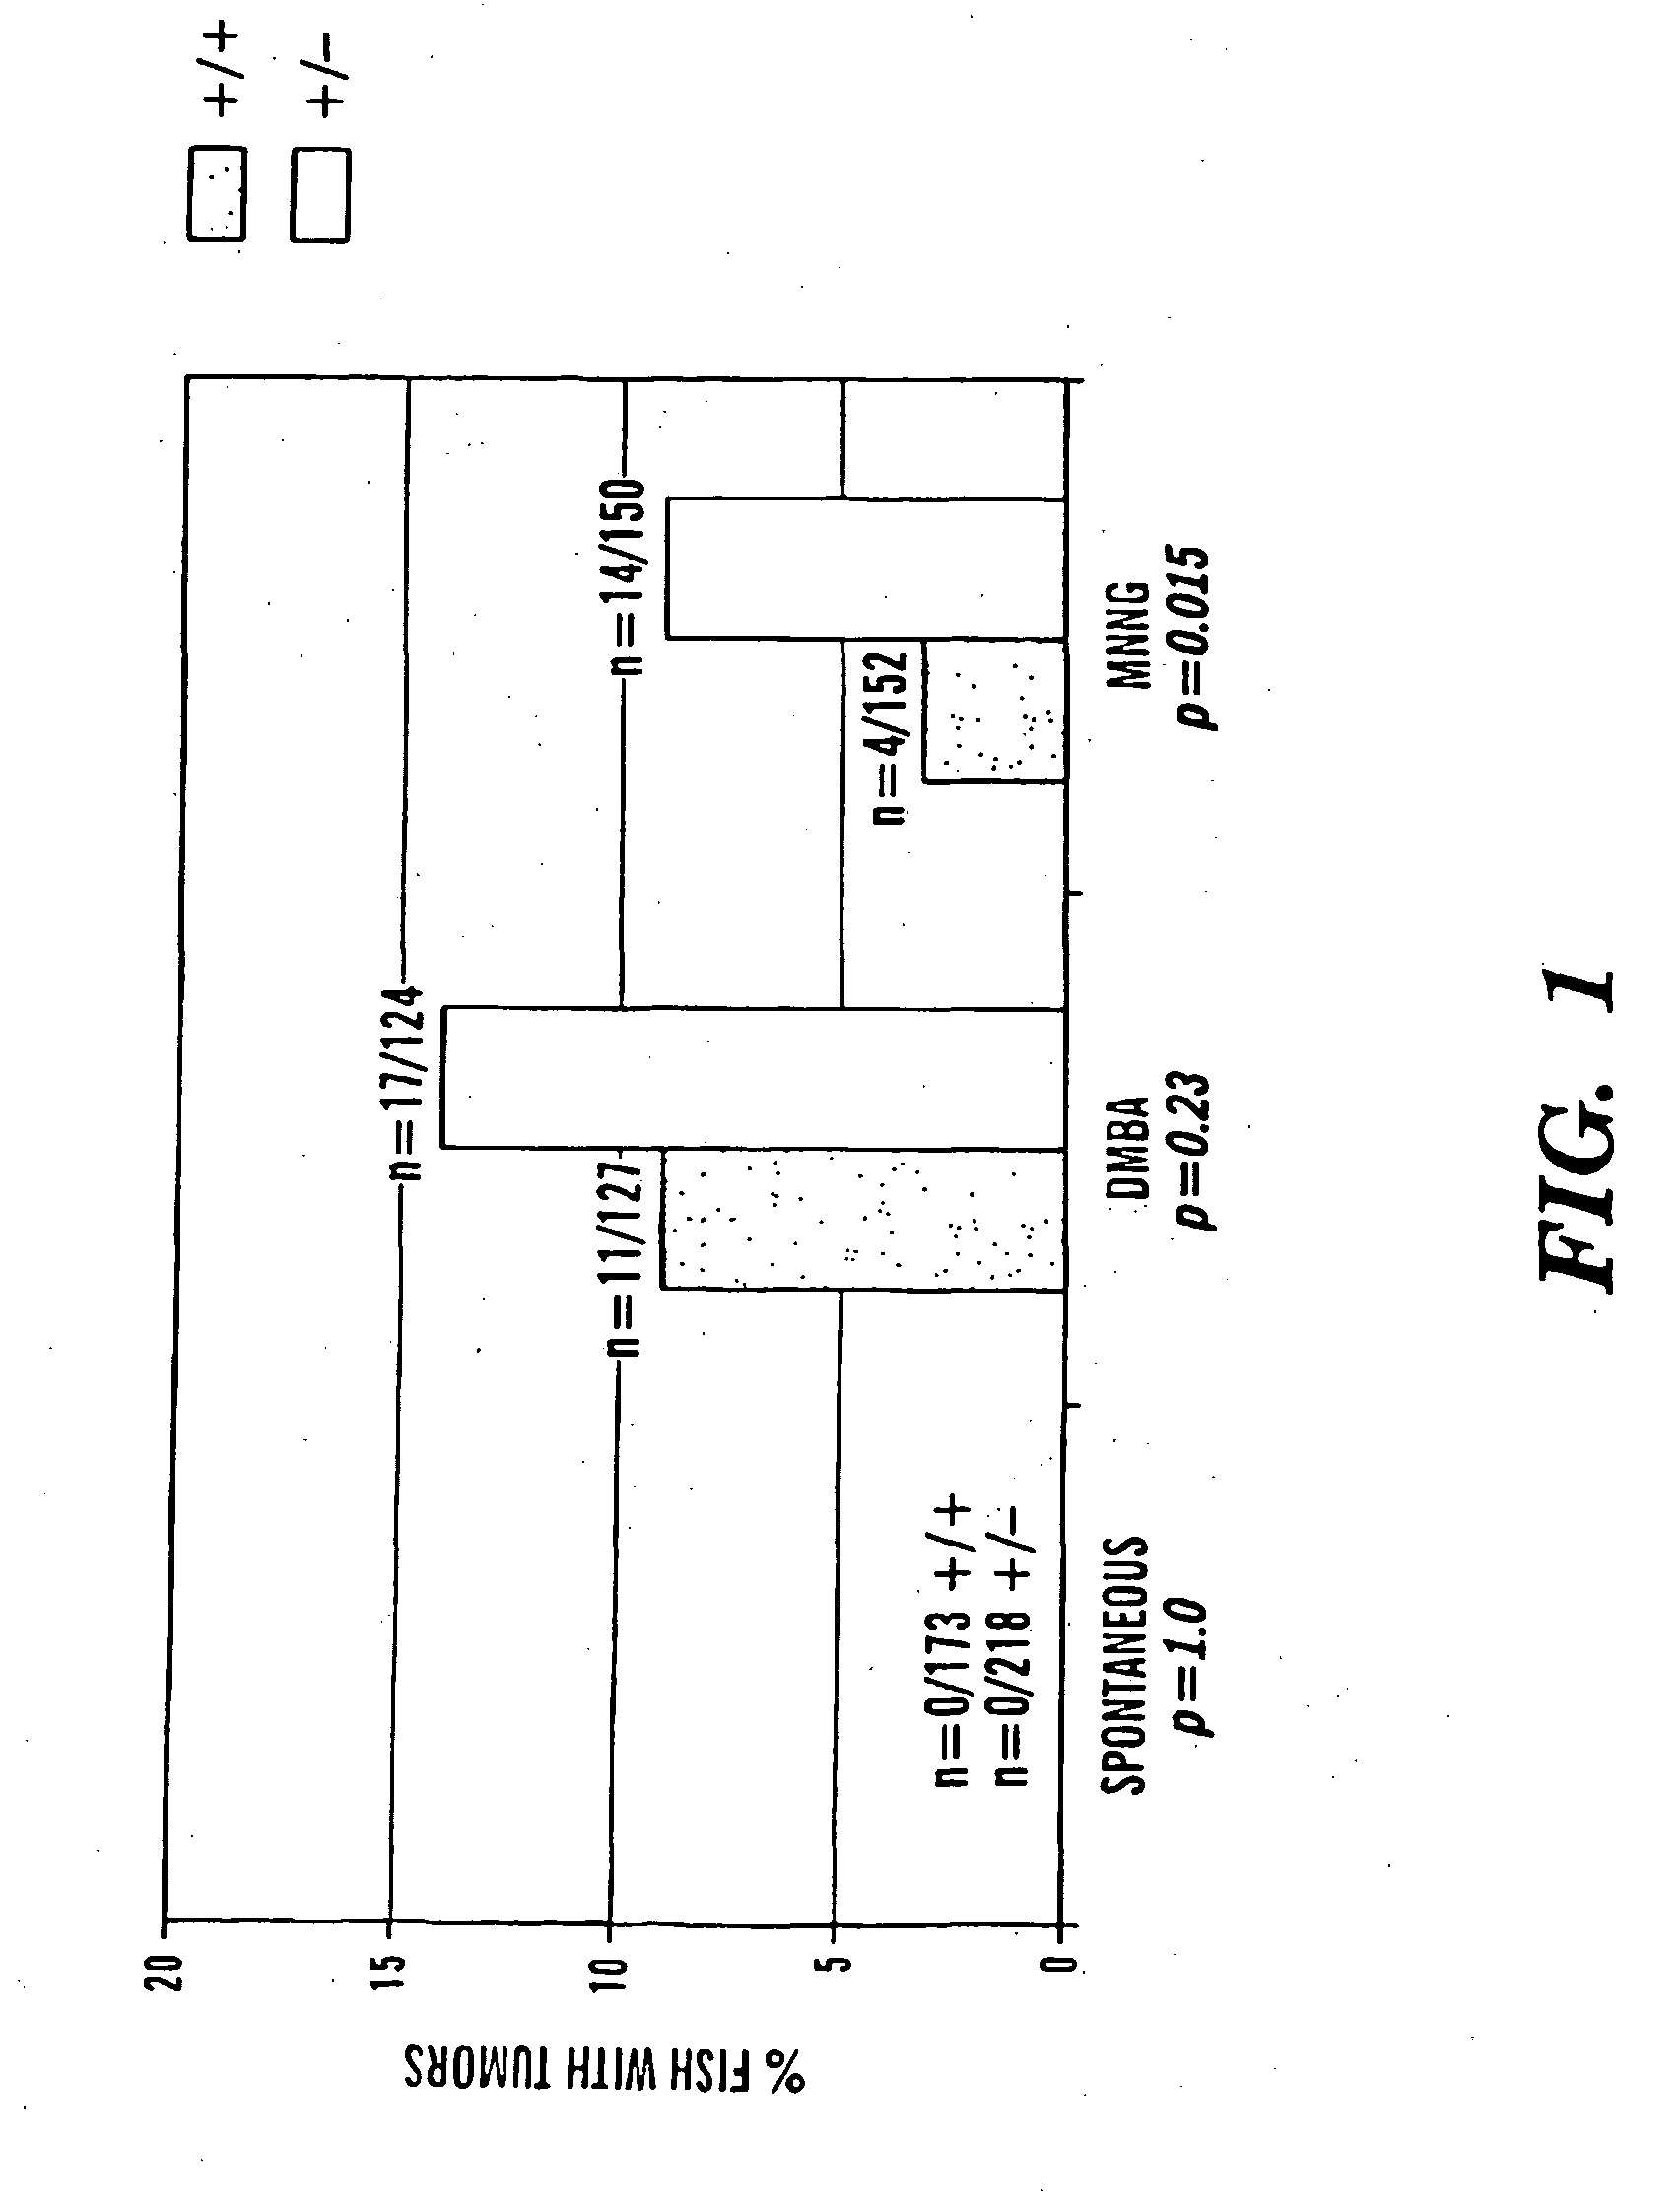 Method of screening compounds